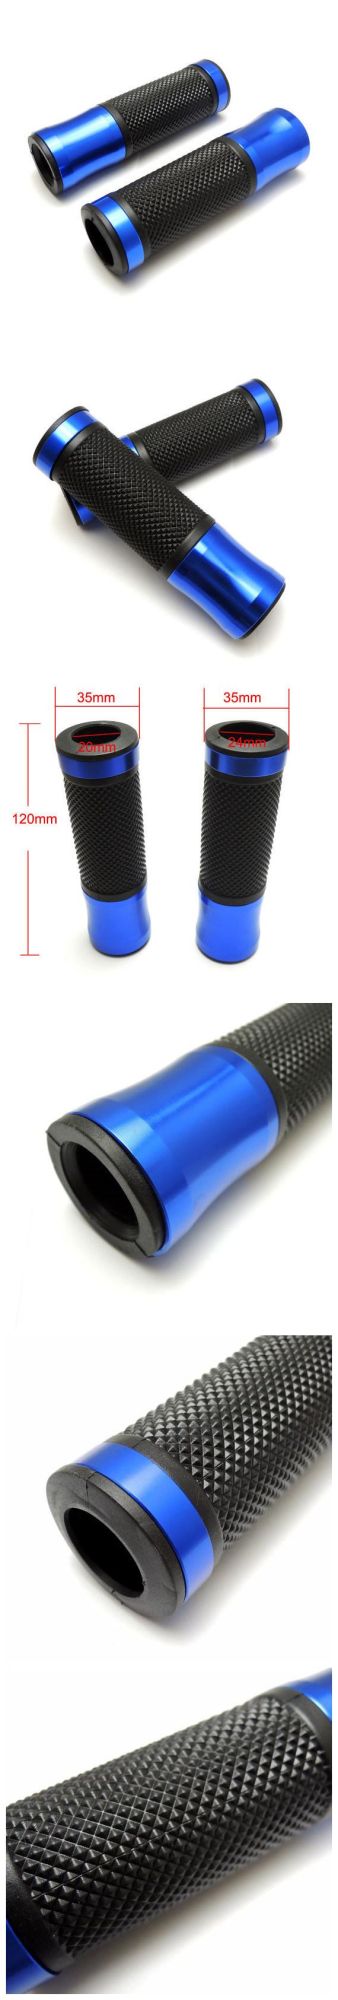 Mix Color Winway Handle Grip Universal Motorcycle Part